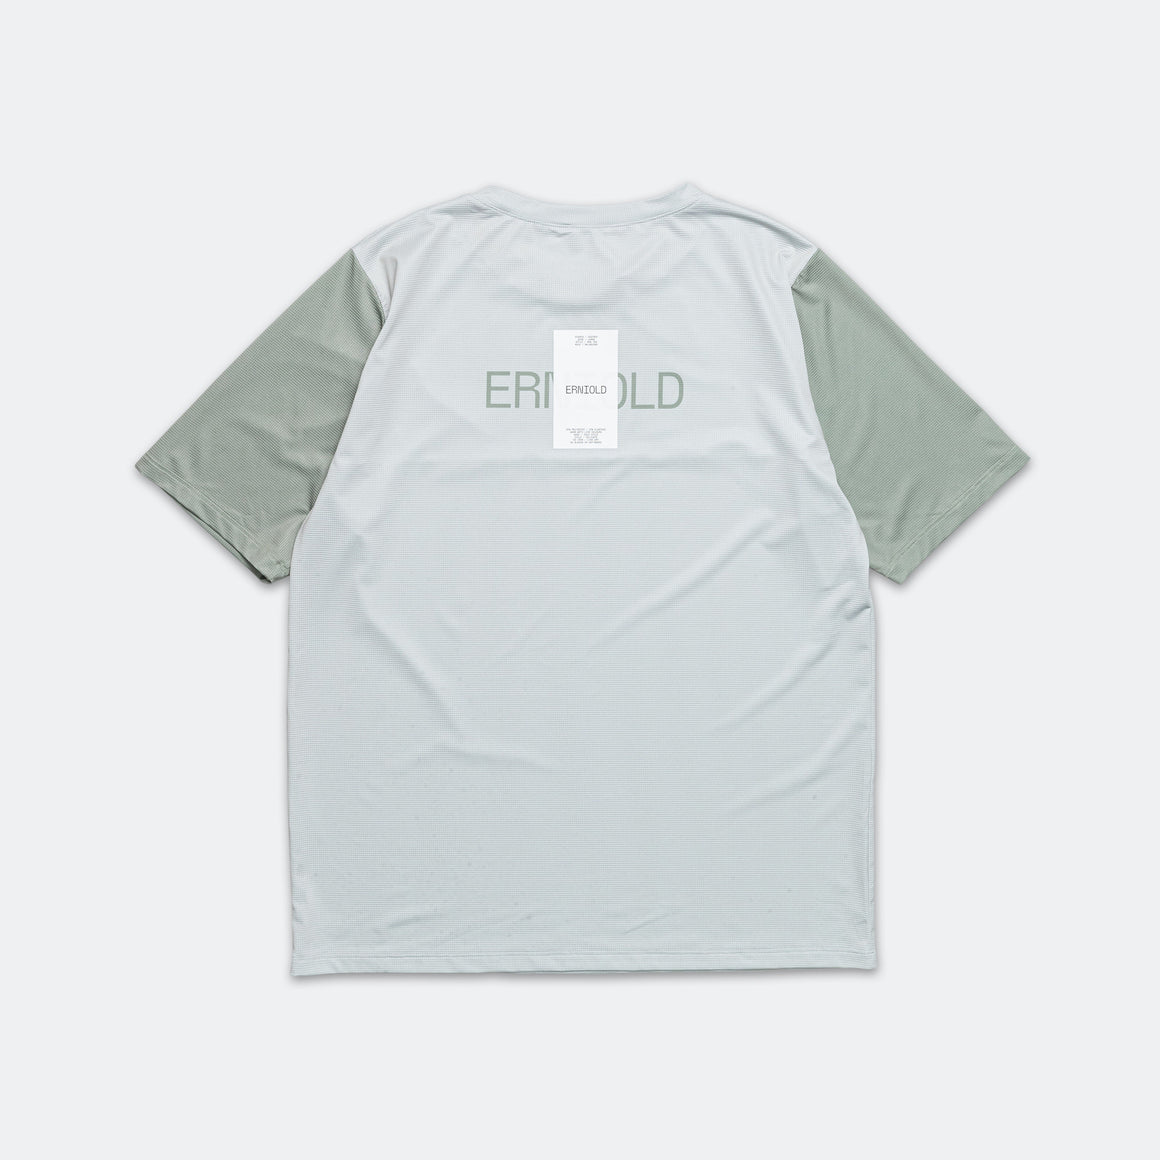 Erniold - Mens Run Tee - Light Moss - Up There Athletics